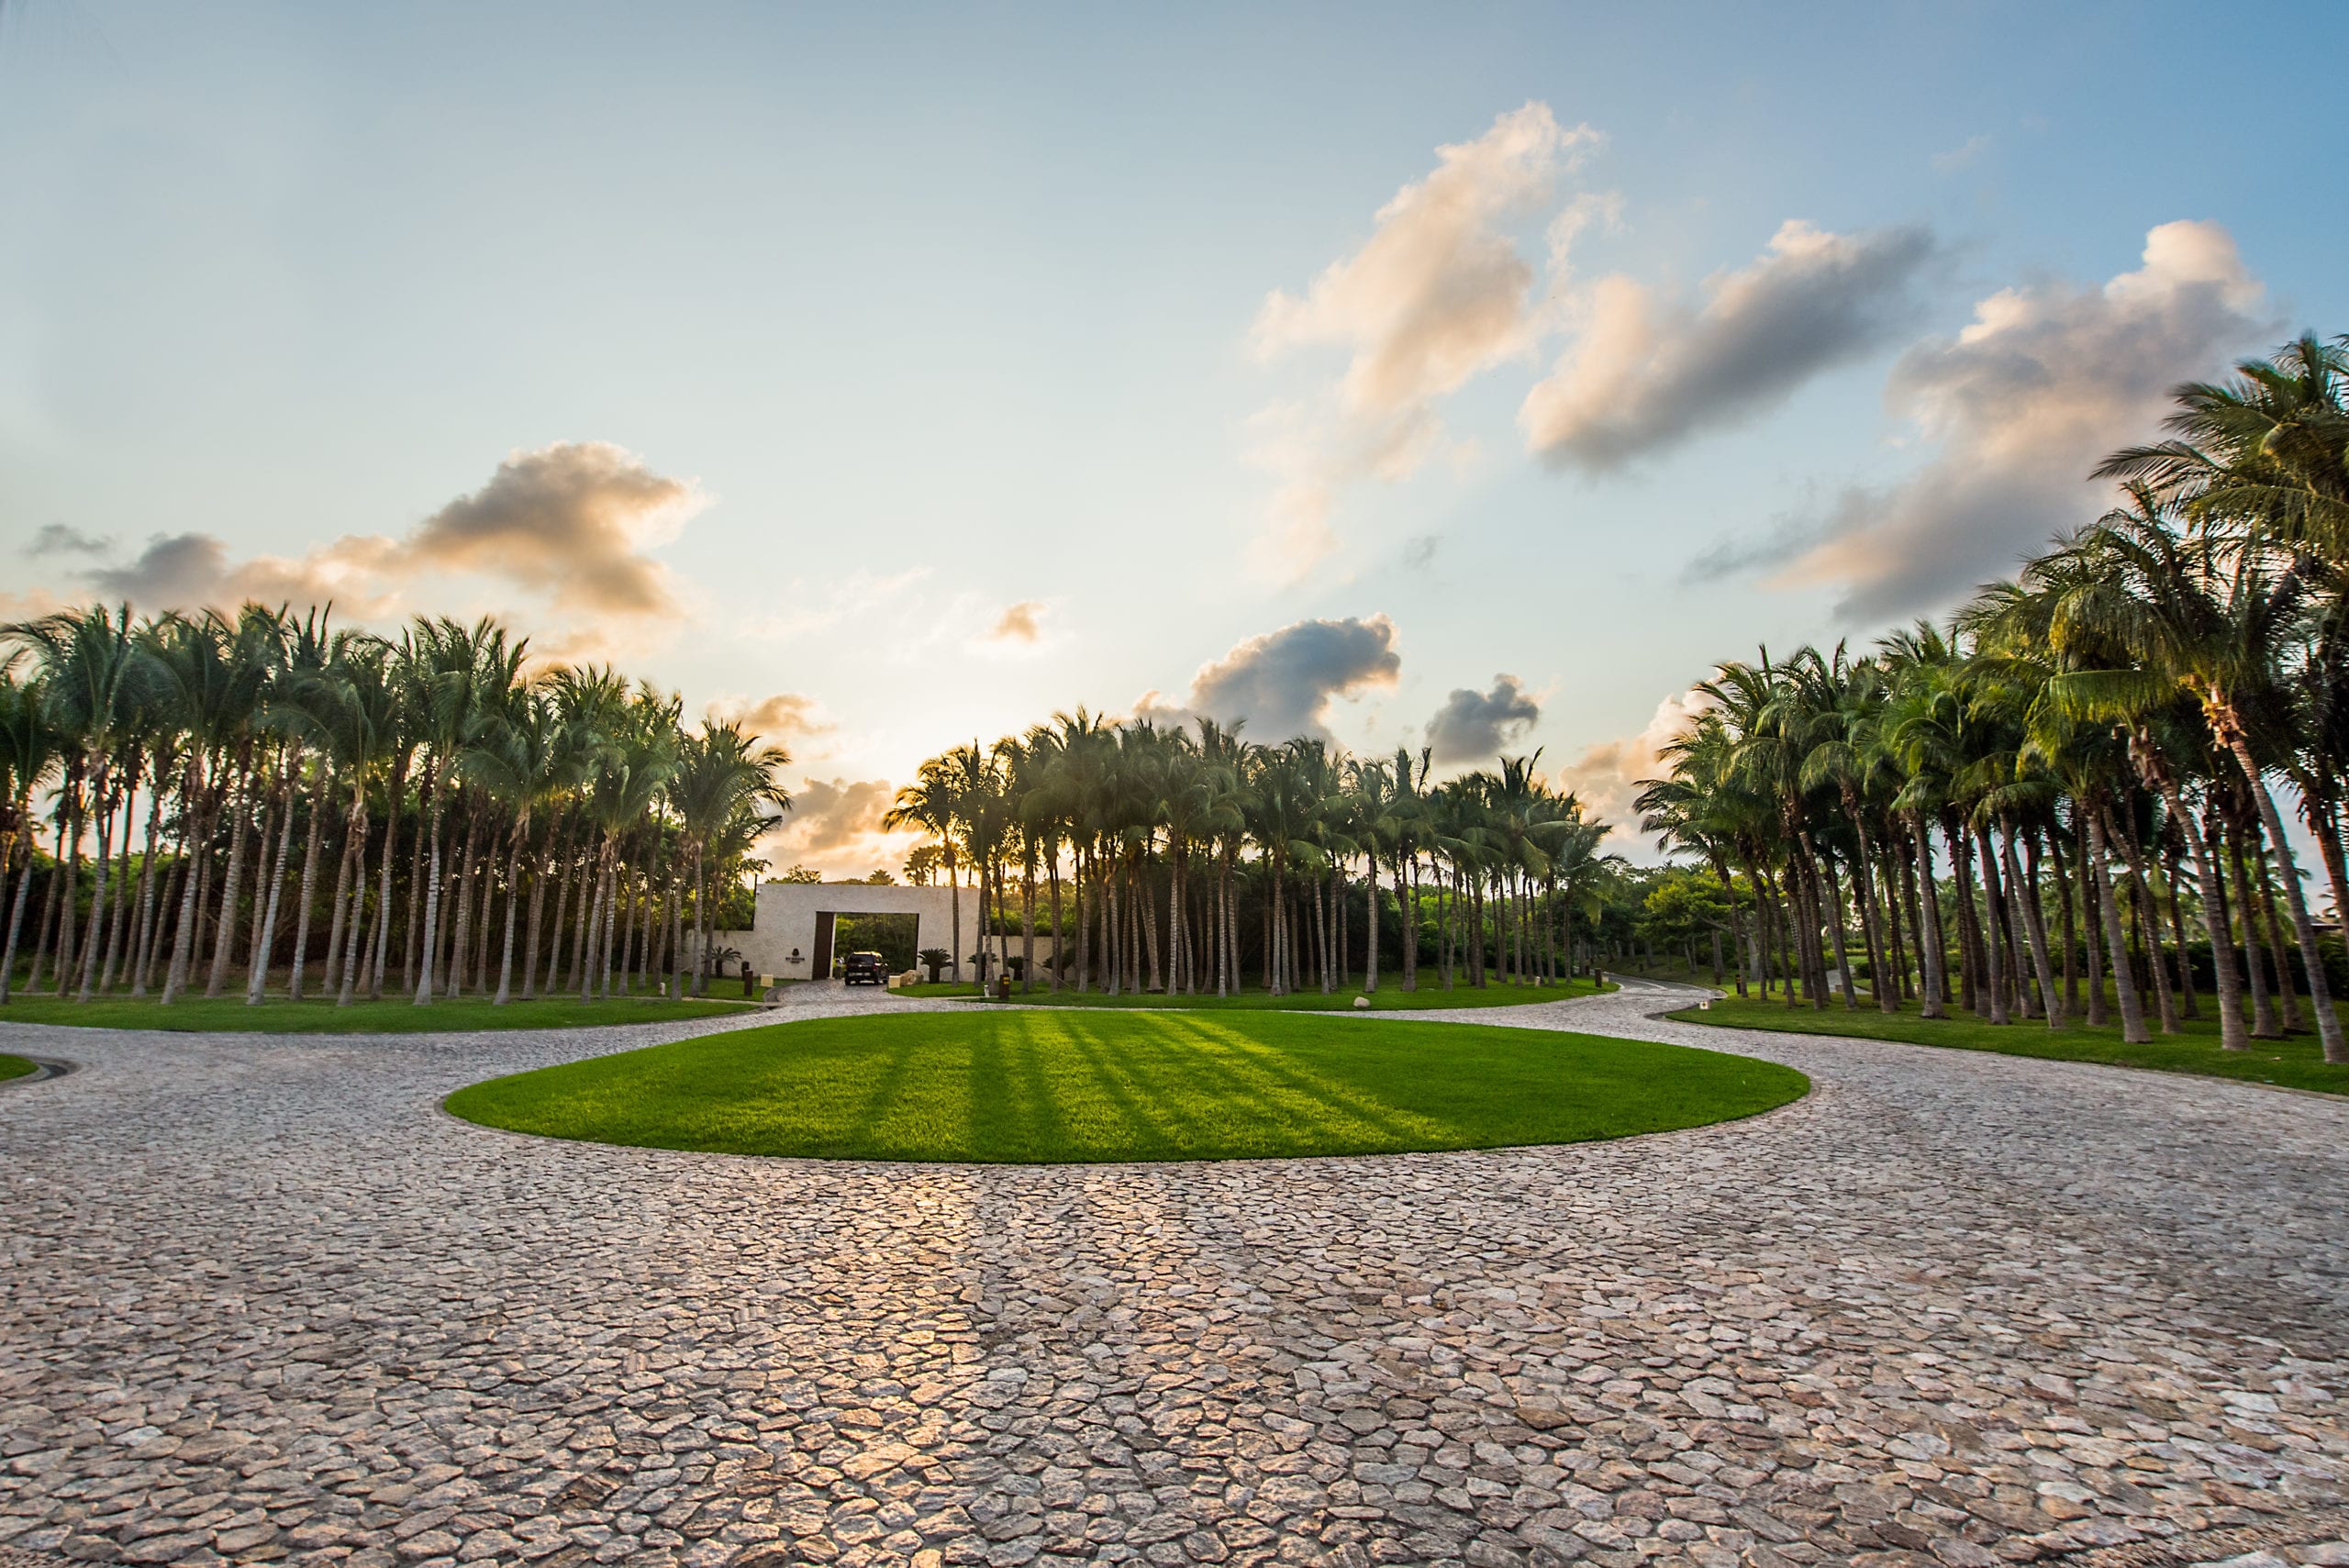 St Regis Building with walkway with palm trees and green lawns